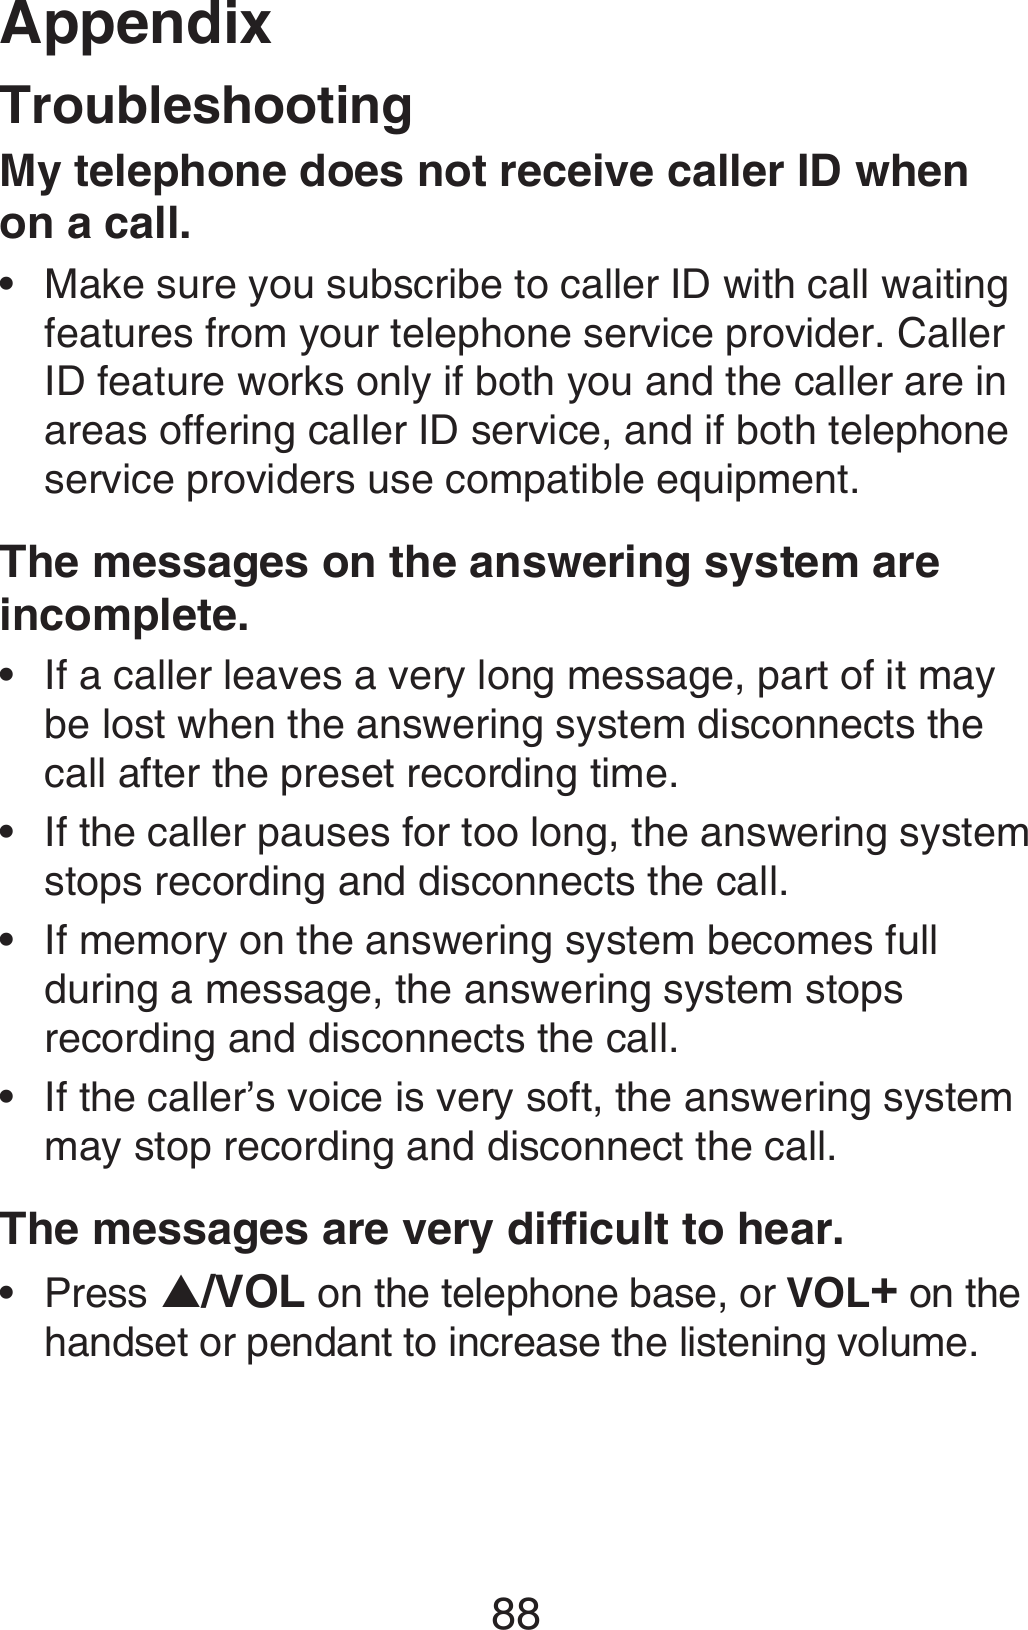 Appendix88TroubleshootingMy telephone does not receive caller ID when on a call.Make sure you subscribe to caller ID with call waiting features from your telephone service provider. Caller ID feature works only if both you and the caller are in areas offering caller ID service, and if both telephone service providers use compatible equipment.The messages on the answering system are incomplete.If a caller leaves a very long message, part of it may be lost when the answering system disconnects the call after the preset recording time.If the caller pauses for too long, the answering system stops recording and disconnects the call.If memory on the answering system becomes full during a message, the answering system stops recording and disconnects the call.If the caller’s voice is very soft, the answering system may stop recording and disconnect the call.The messages are very difficult to hear.Press S/VOL on the telephone base, or VOL+ on the handset or pendant to increase the listening volume.••••••